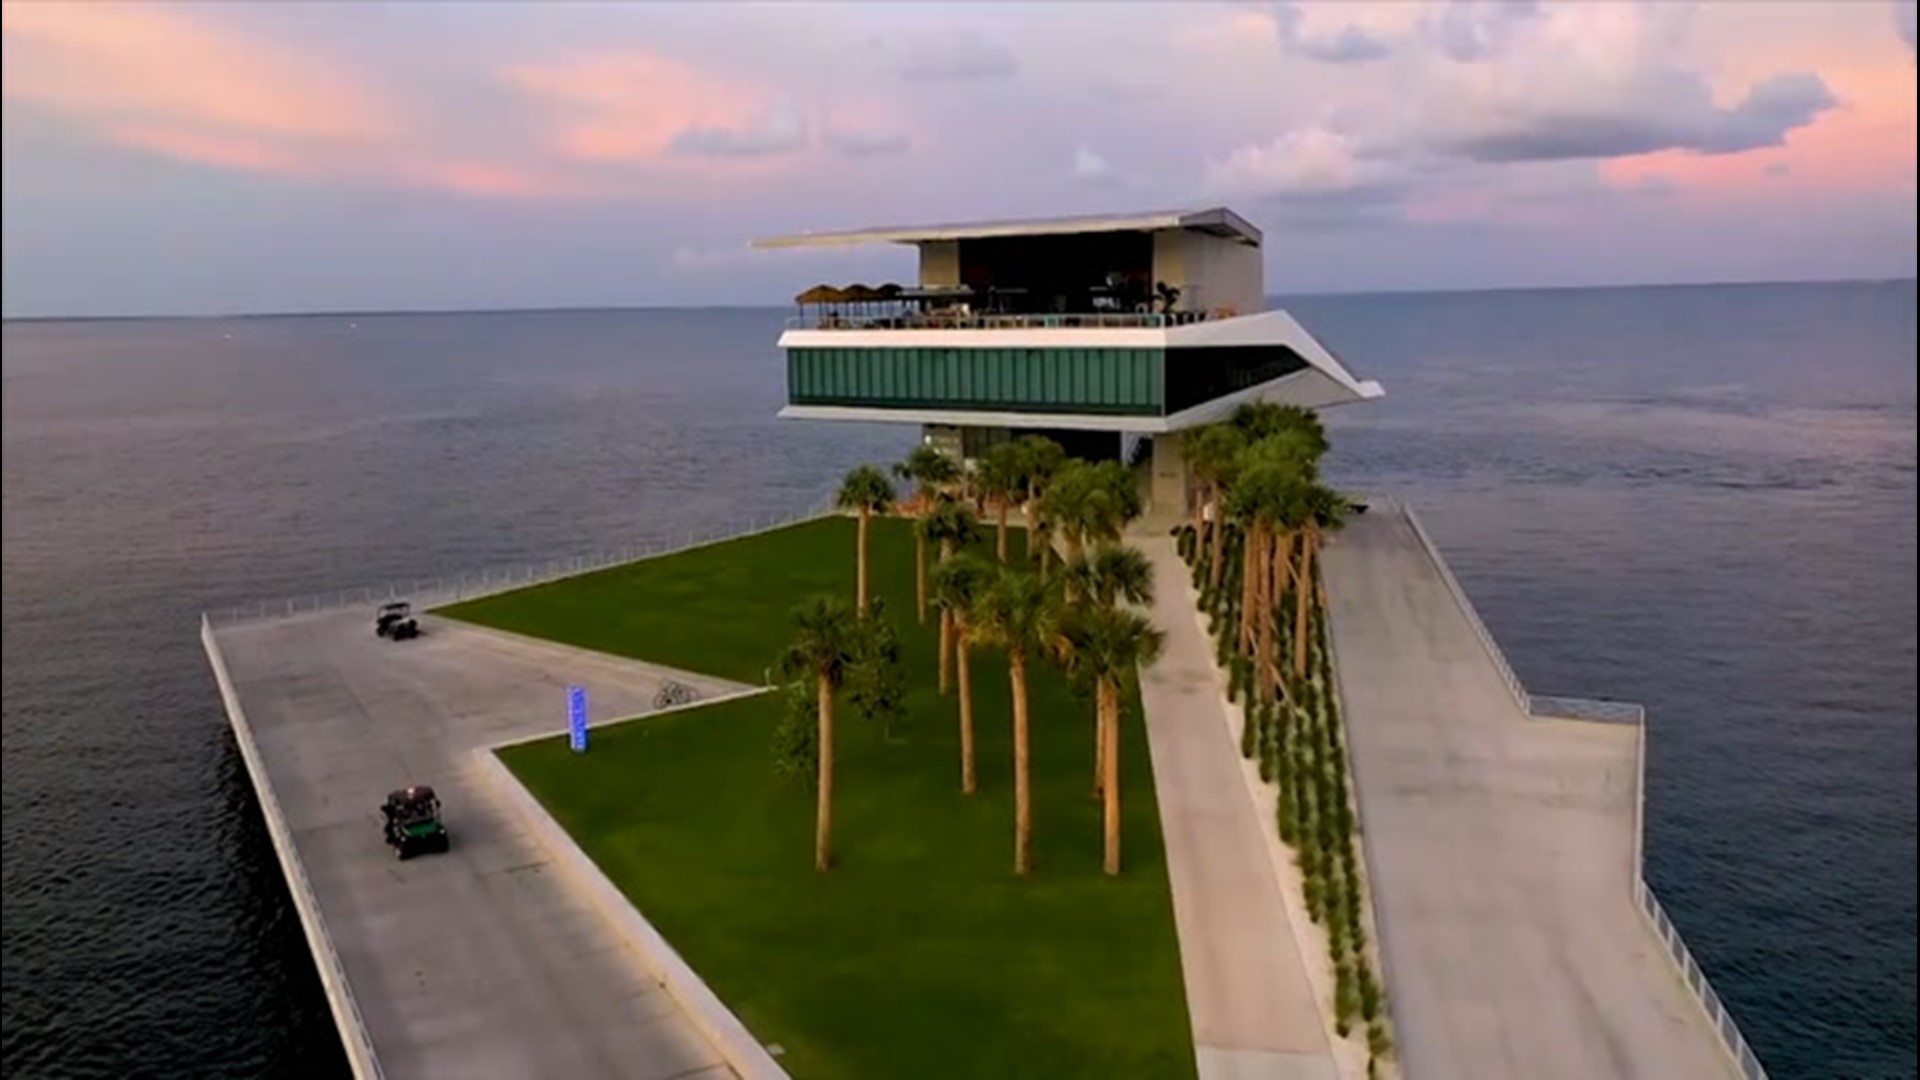 St. Petersburg, Florida, opened its nearly $100-million pier/park this week after seven years of construction.